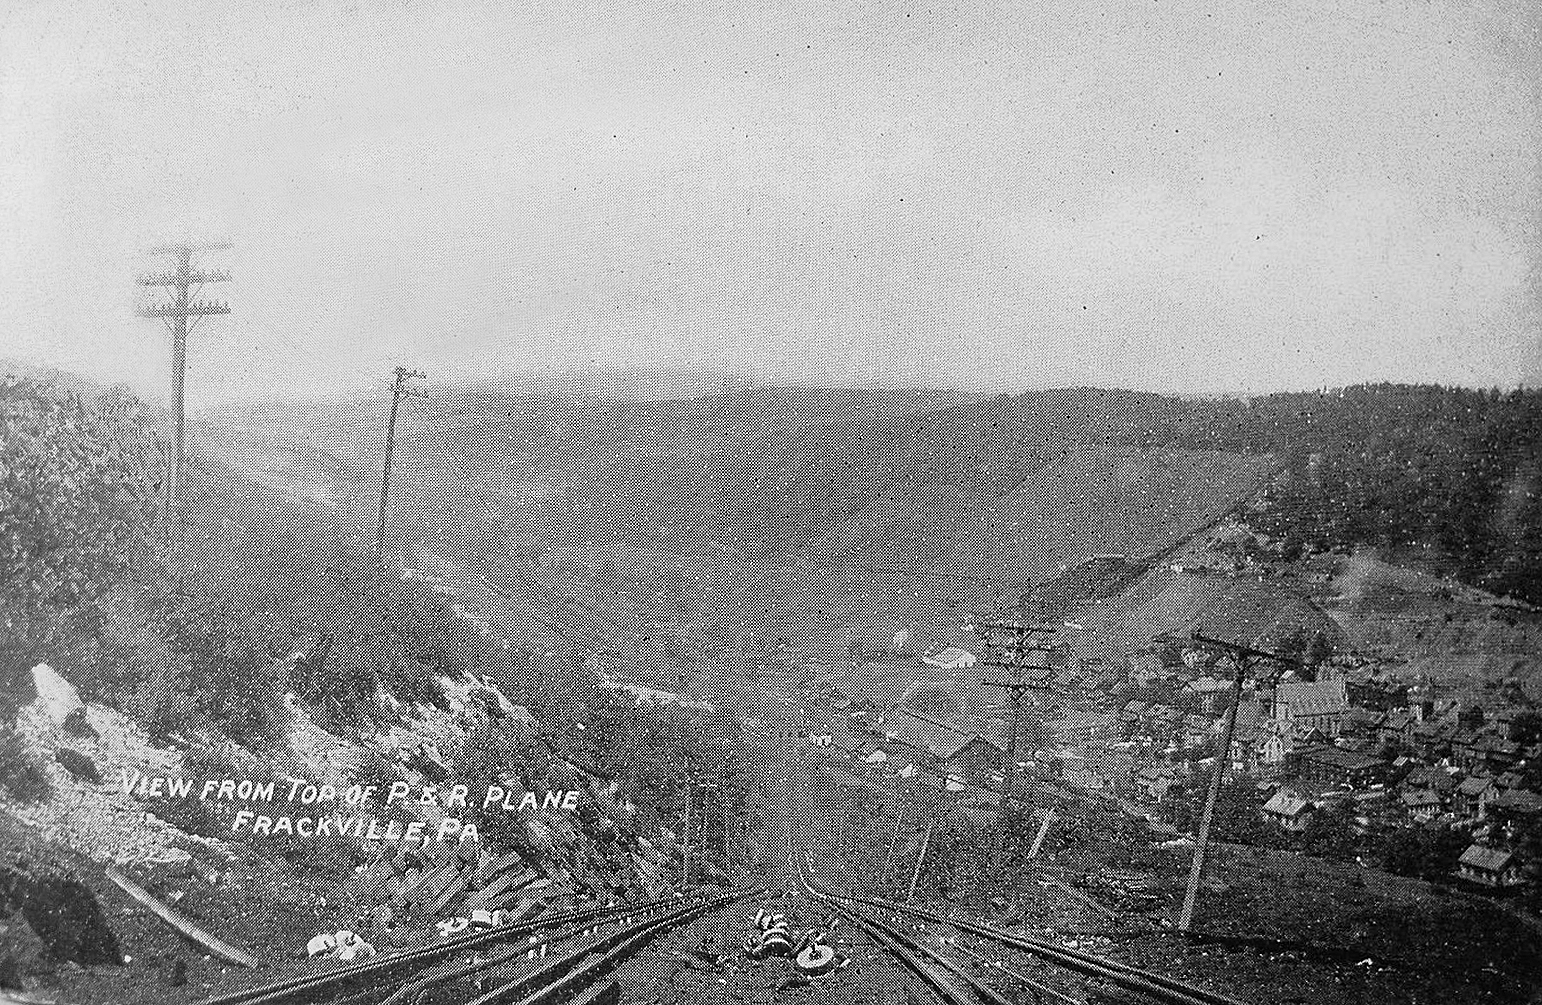 From 1909, a view down the 2,500 feet of Mahanoy Plane railroad track, showing the valley below.